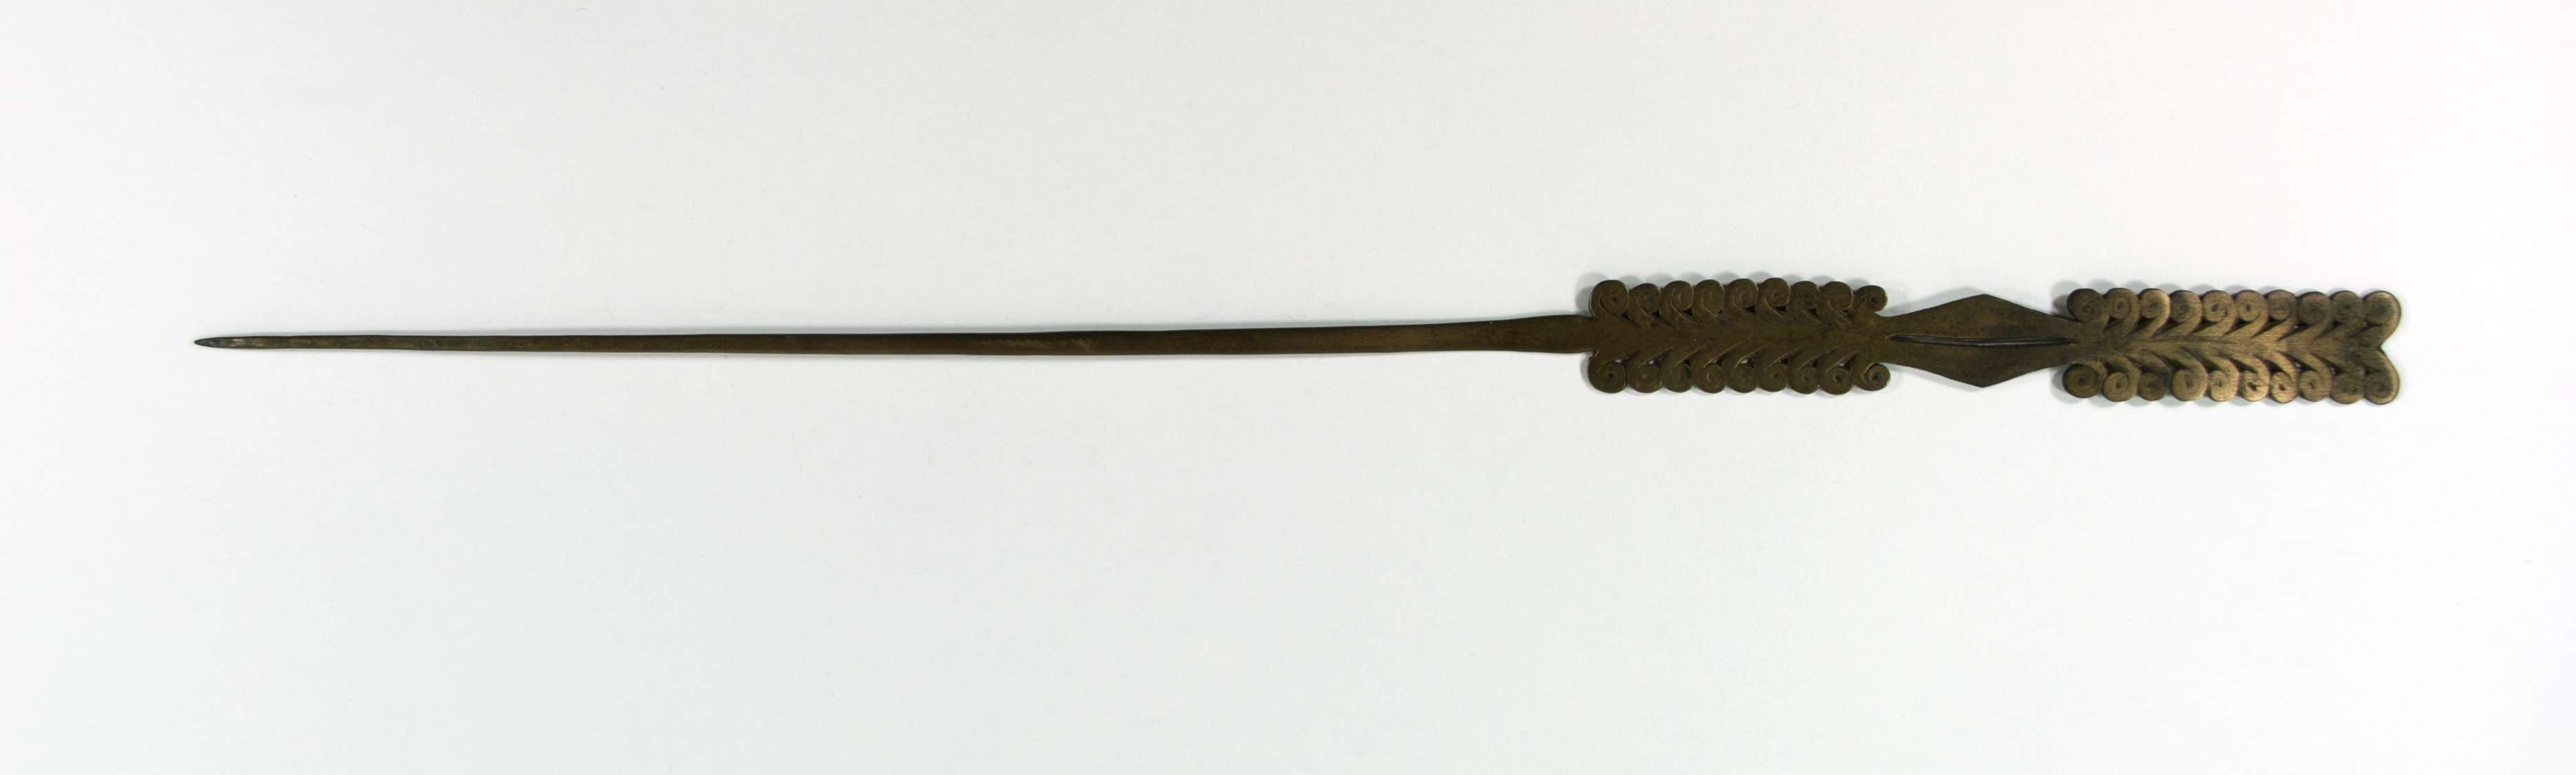 Brass hairpin with flat cross section; stacked scrolls turning away from the shaft. One part of the top seems discoloured or lighter, perhaps by light, although it looks pleasing.